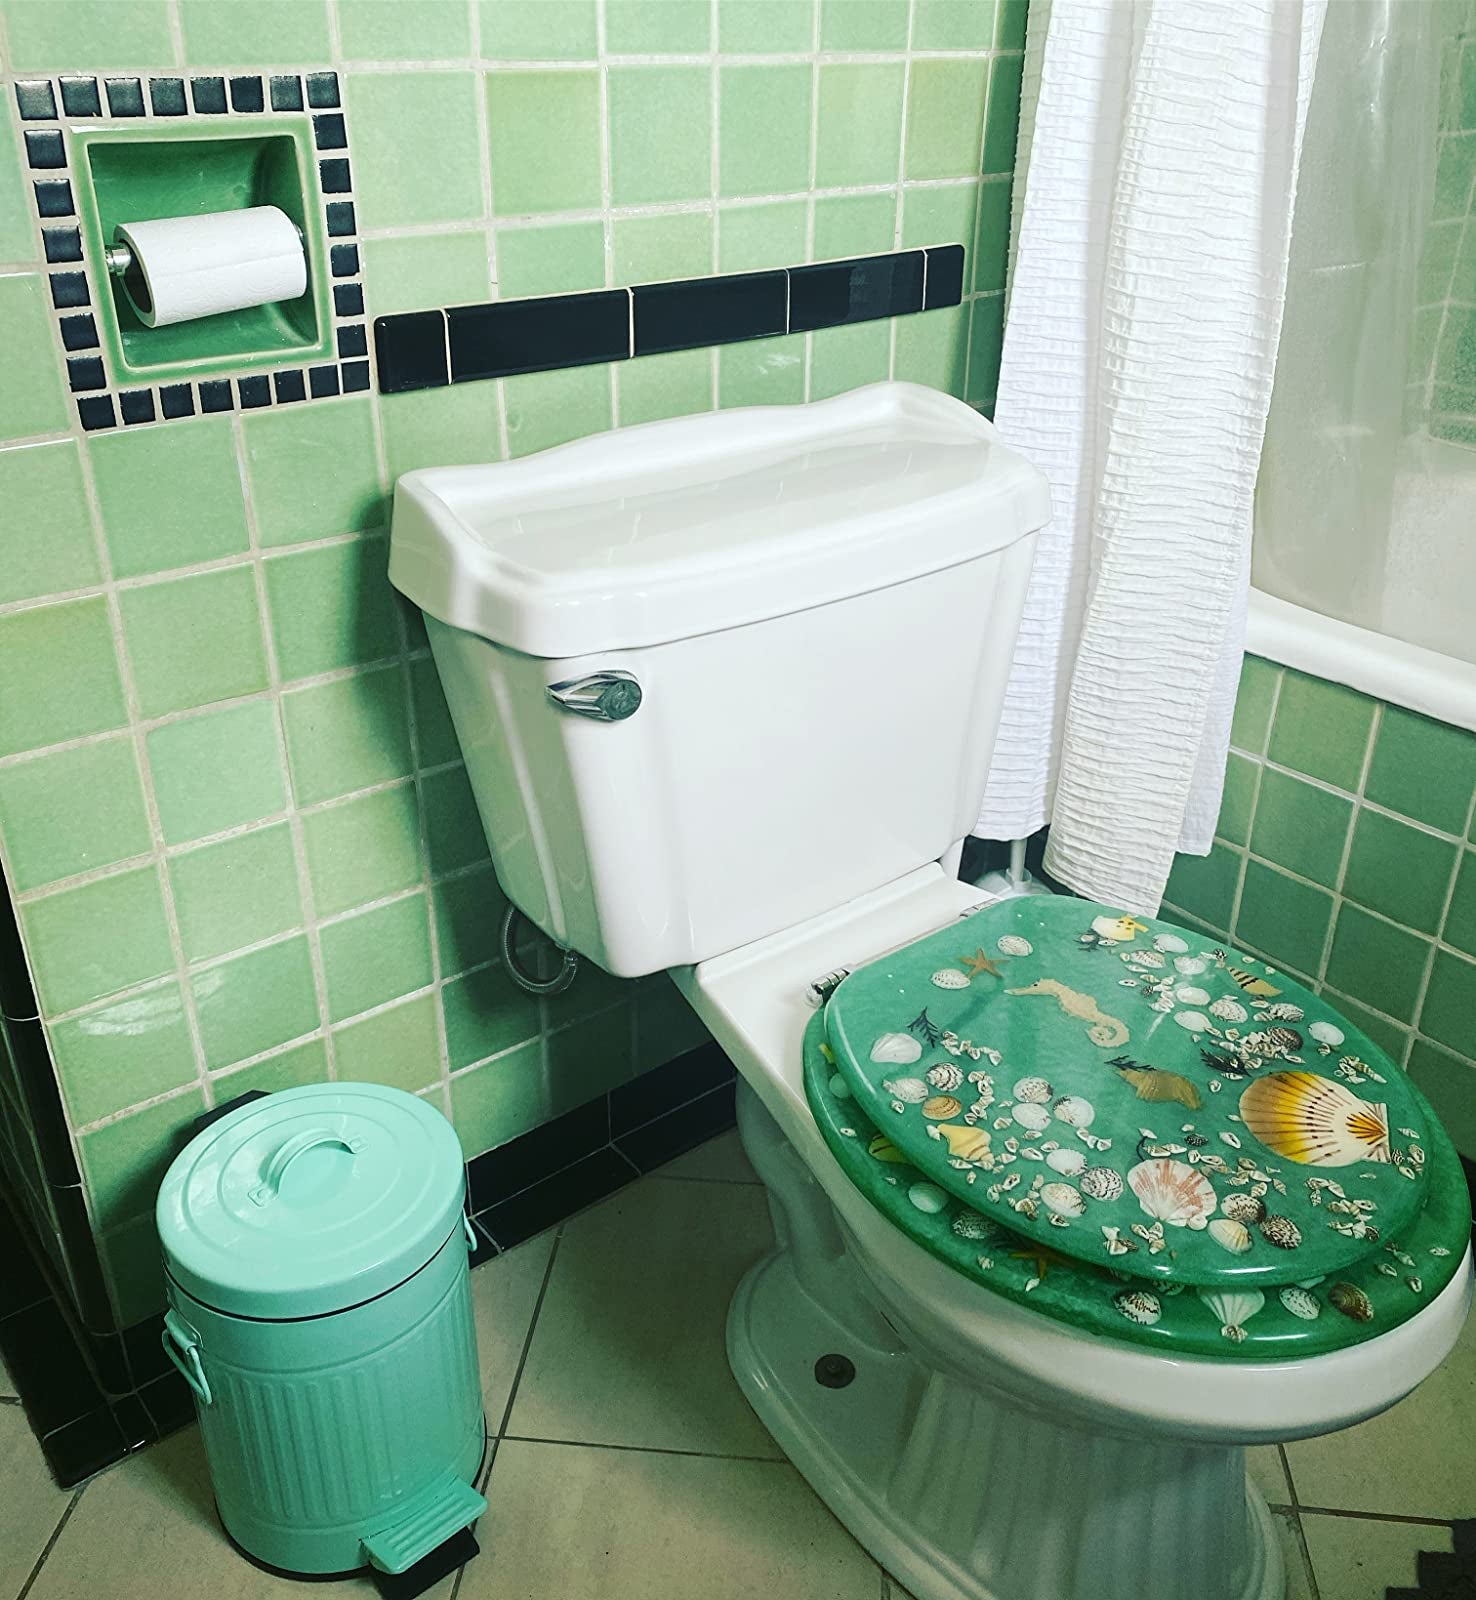 reviewer image of the mint green garbage can in a mint green bathroom